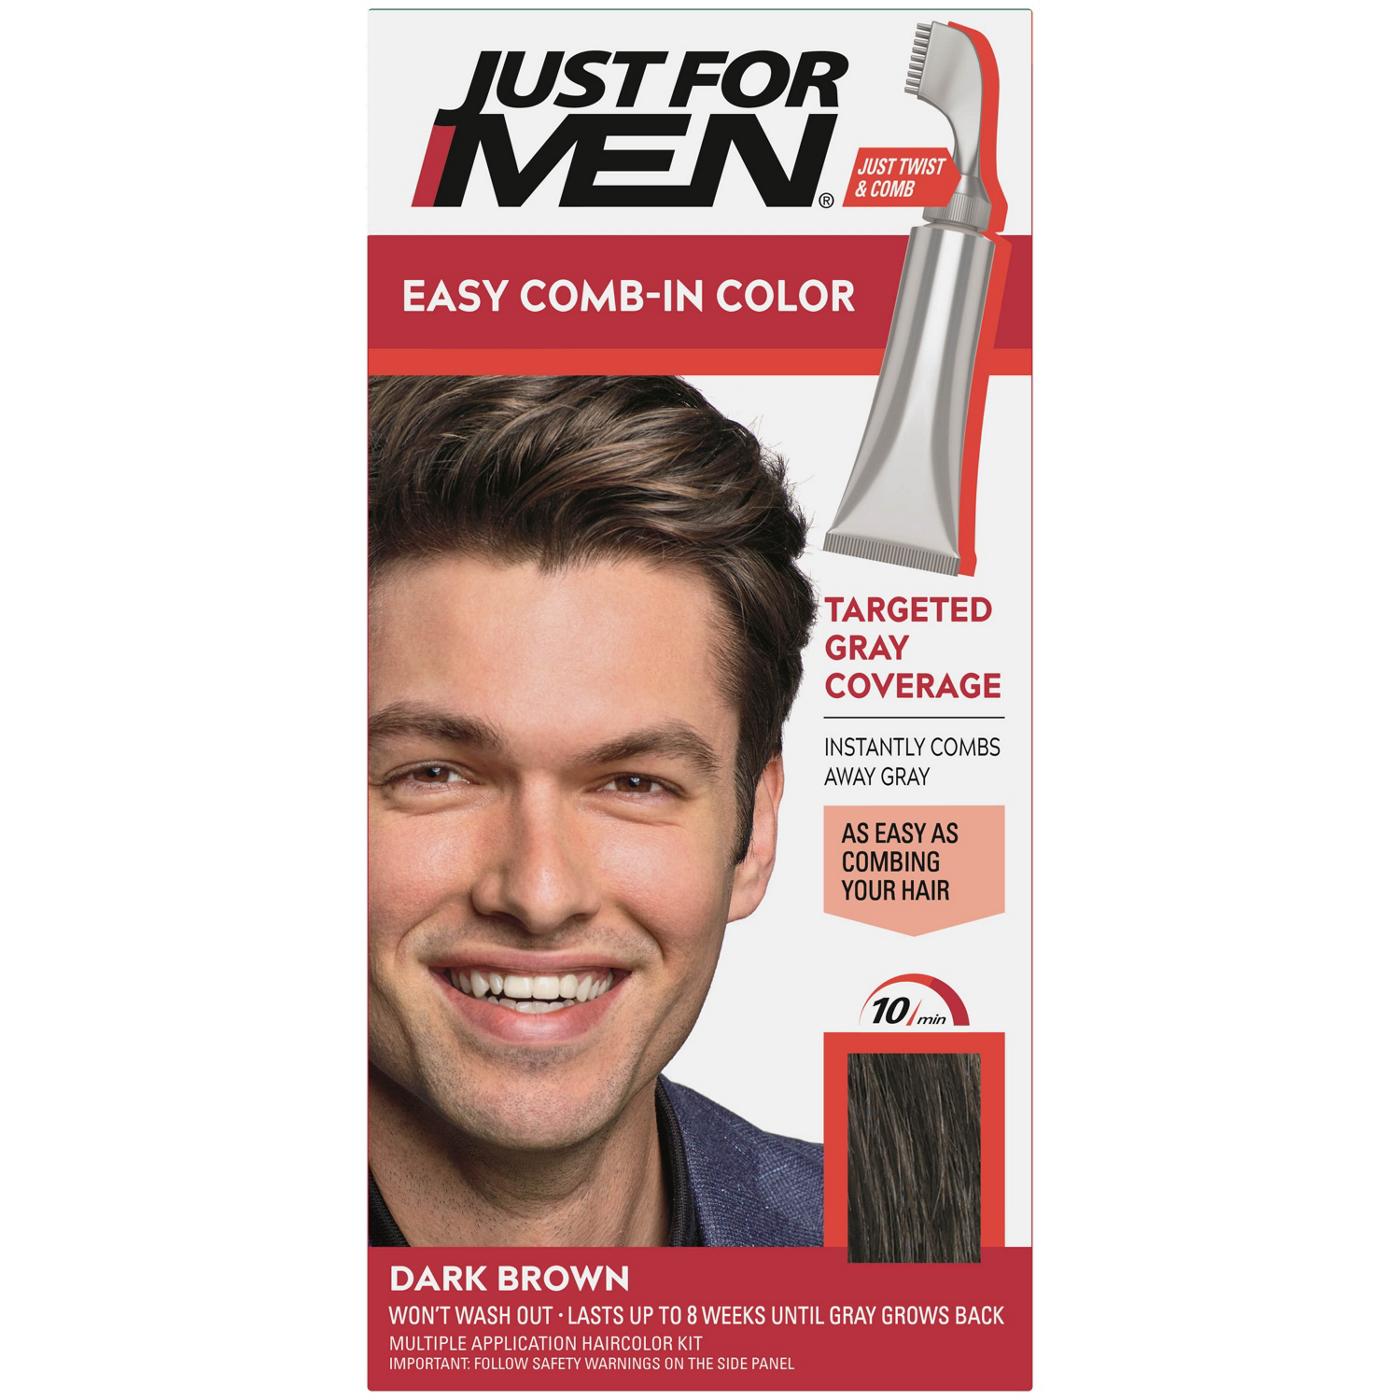 Just For Men Comb In Haircolor Dark Brown A-45; image 2 of 2